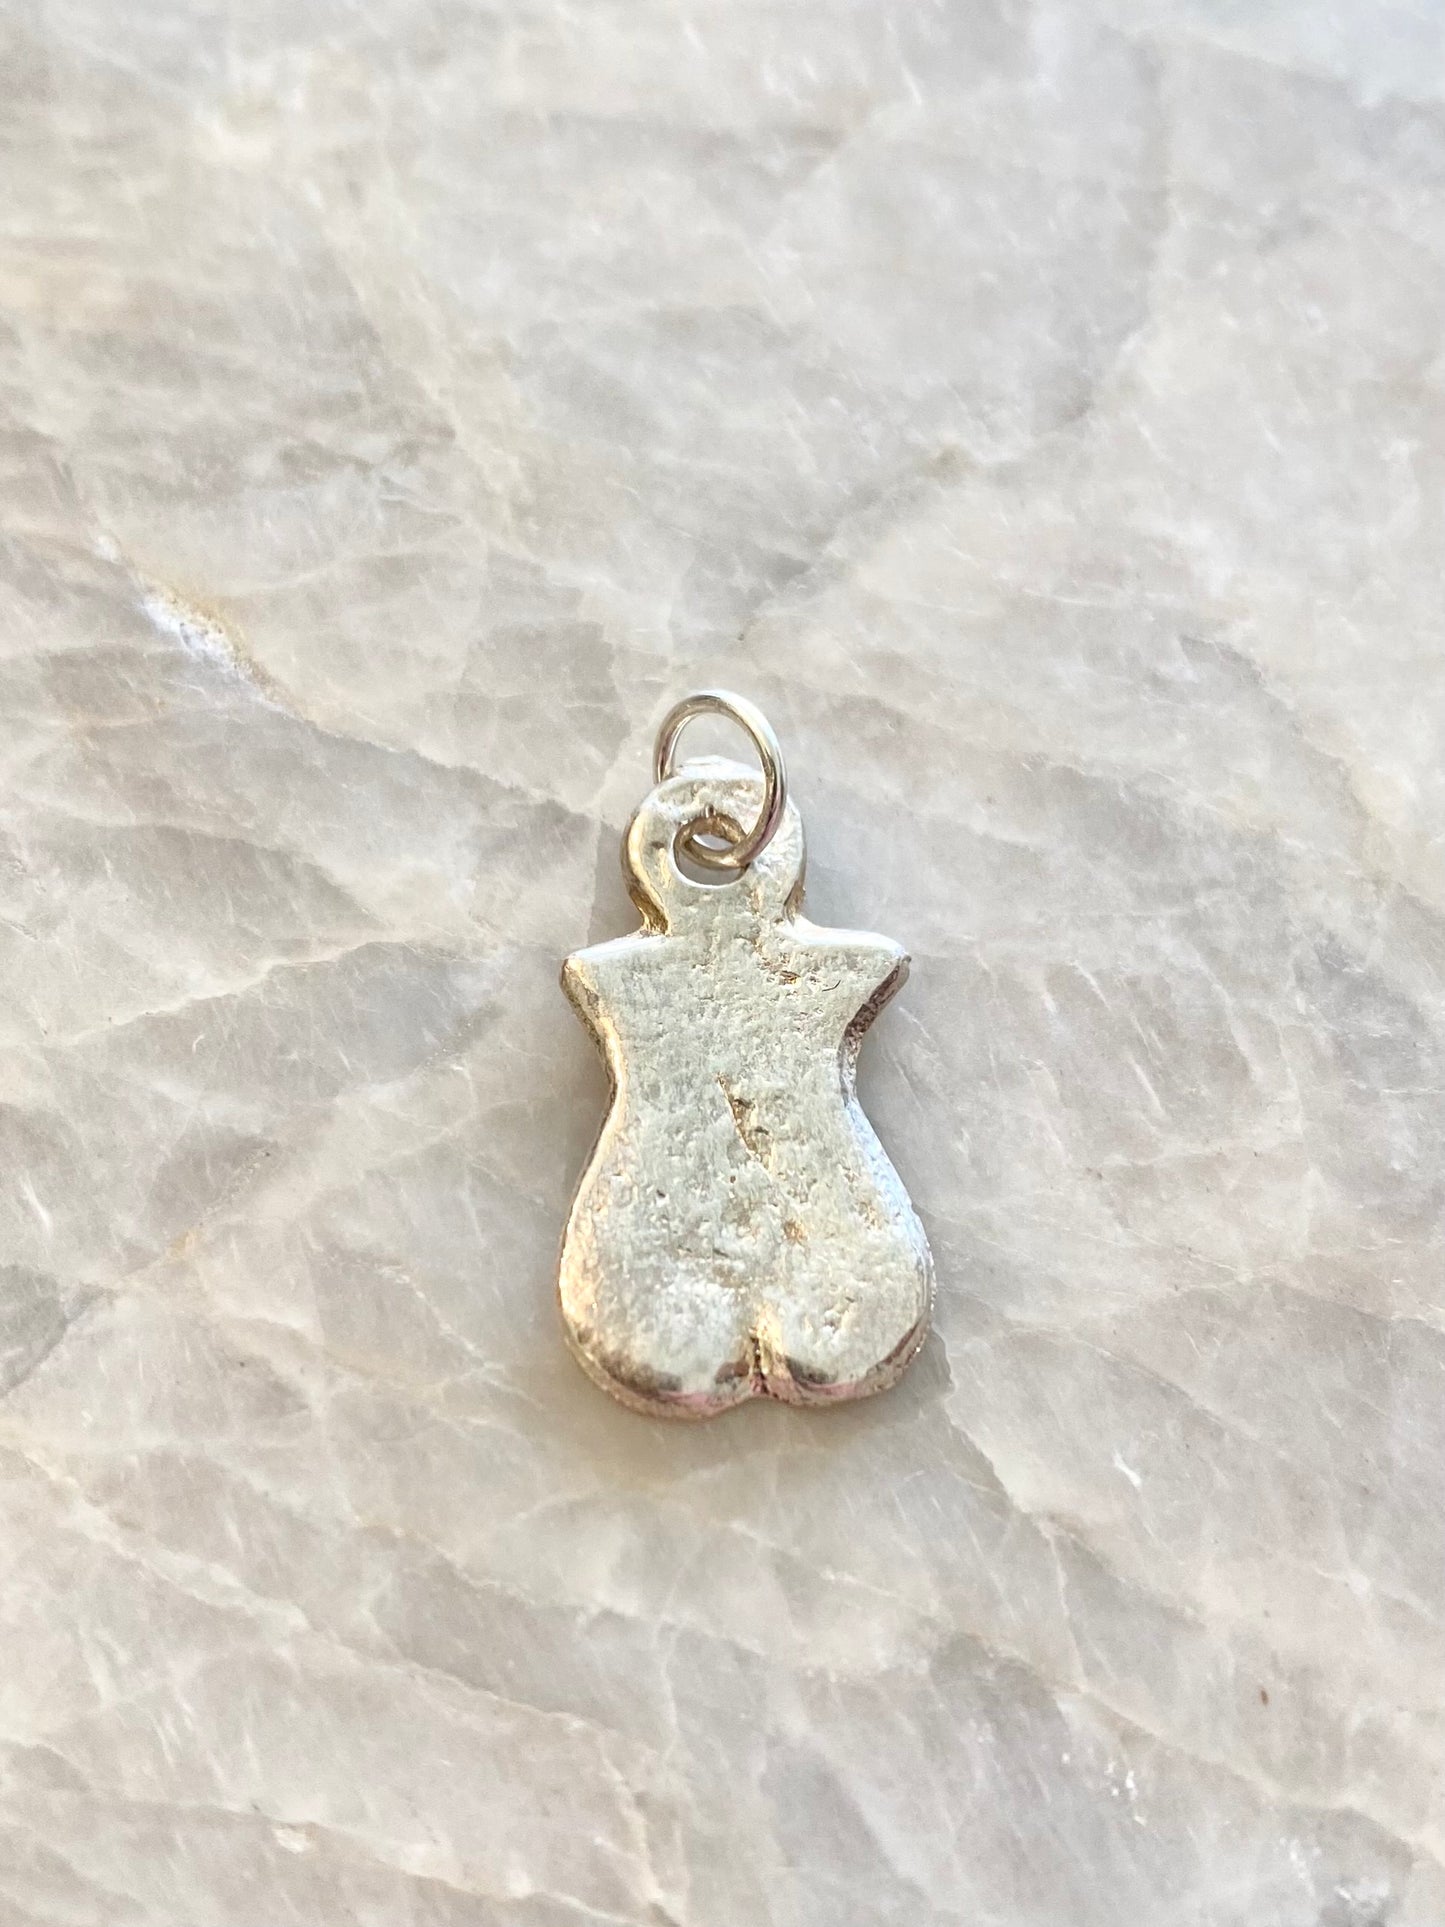 Solid Sterling Silver Tushie Amulet